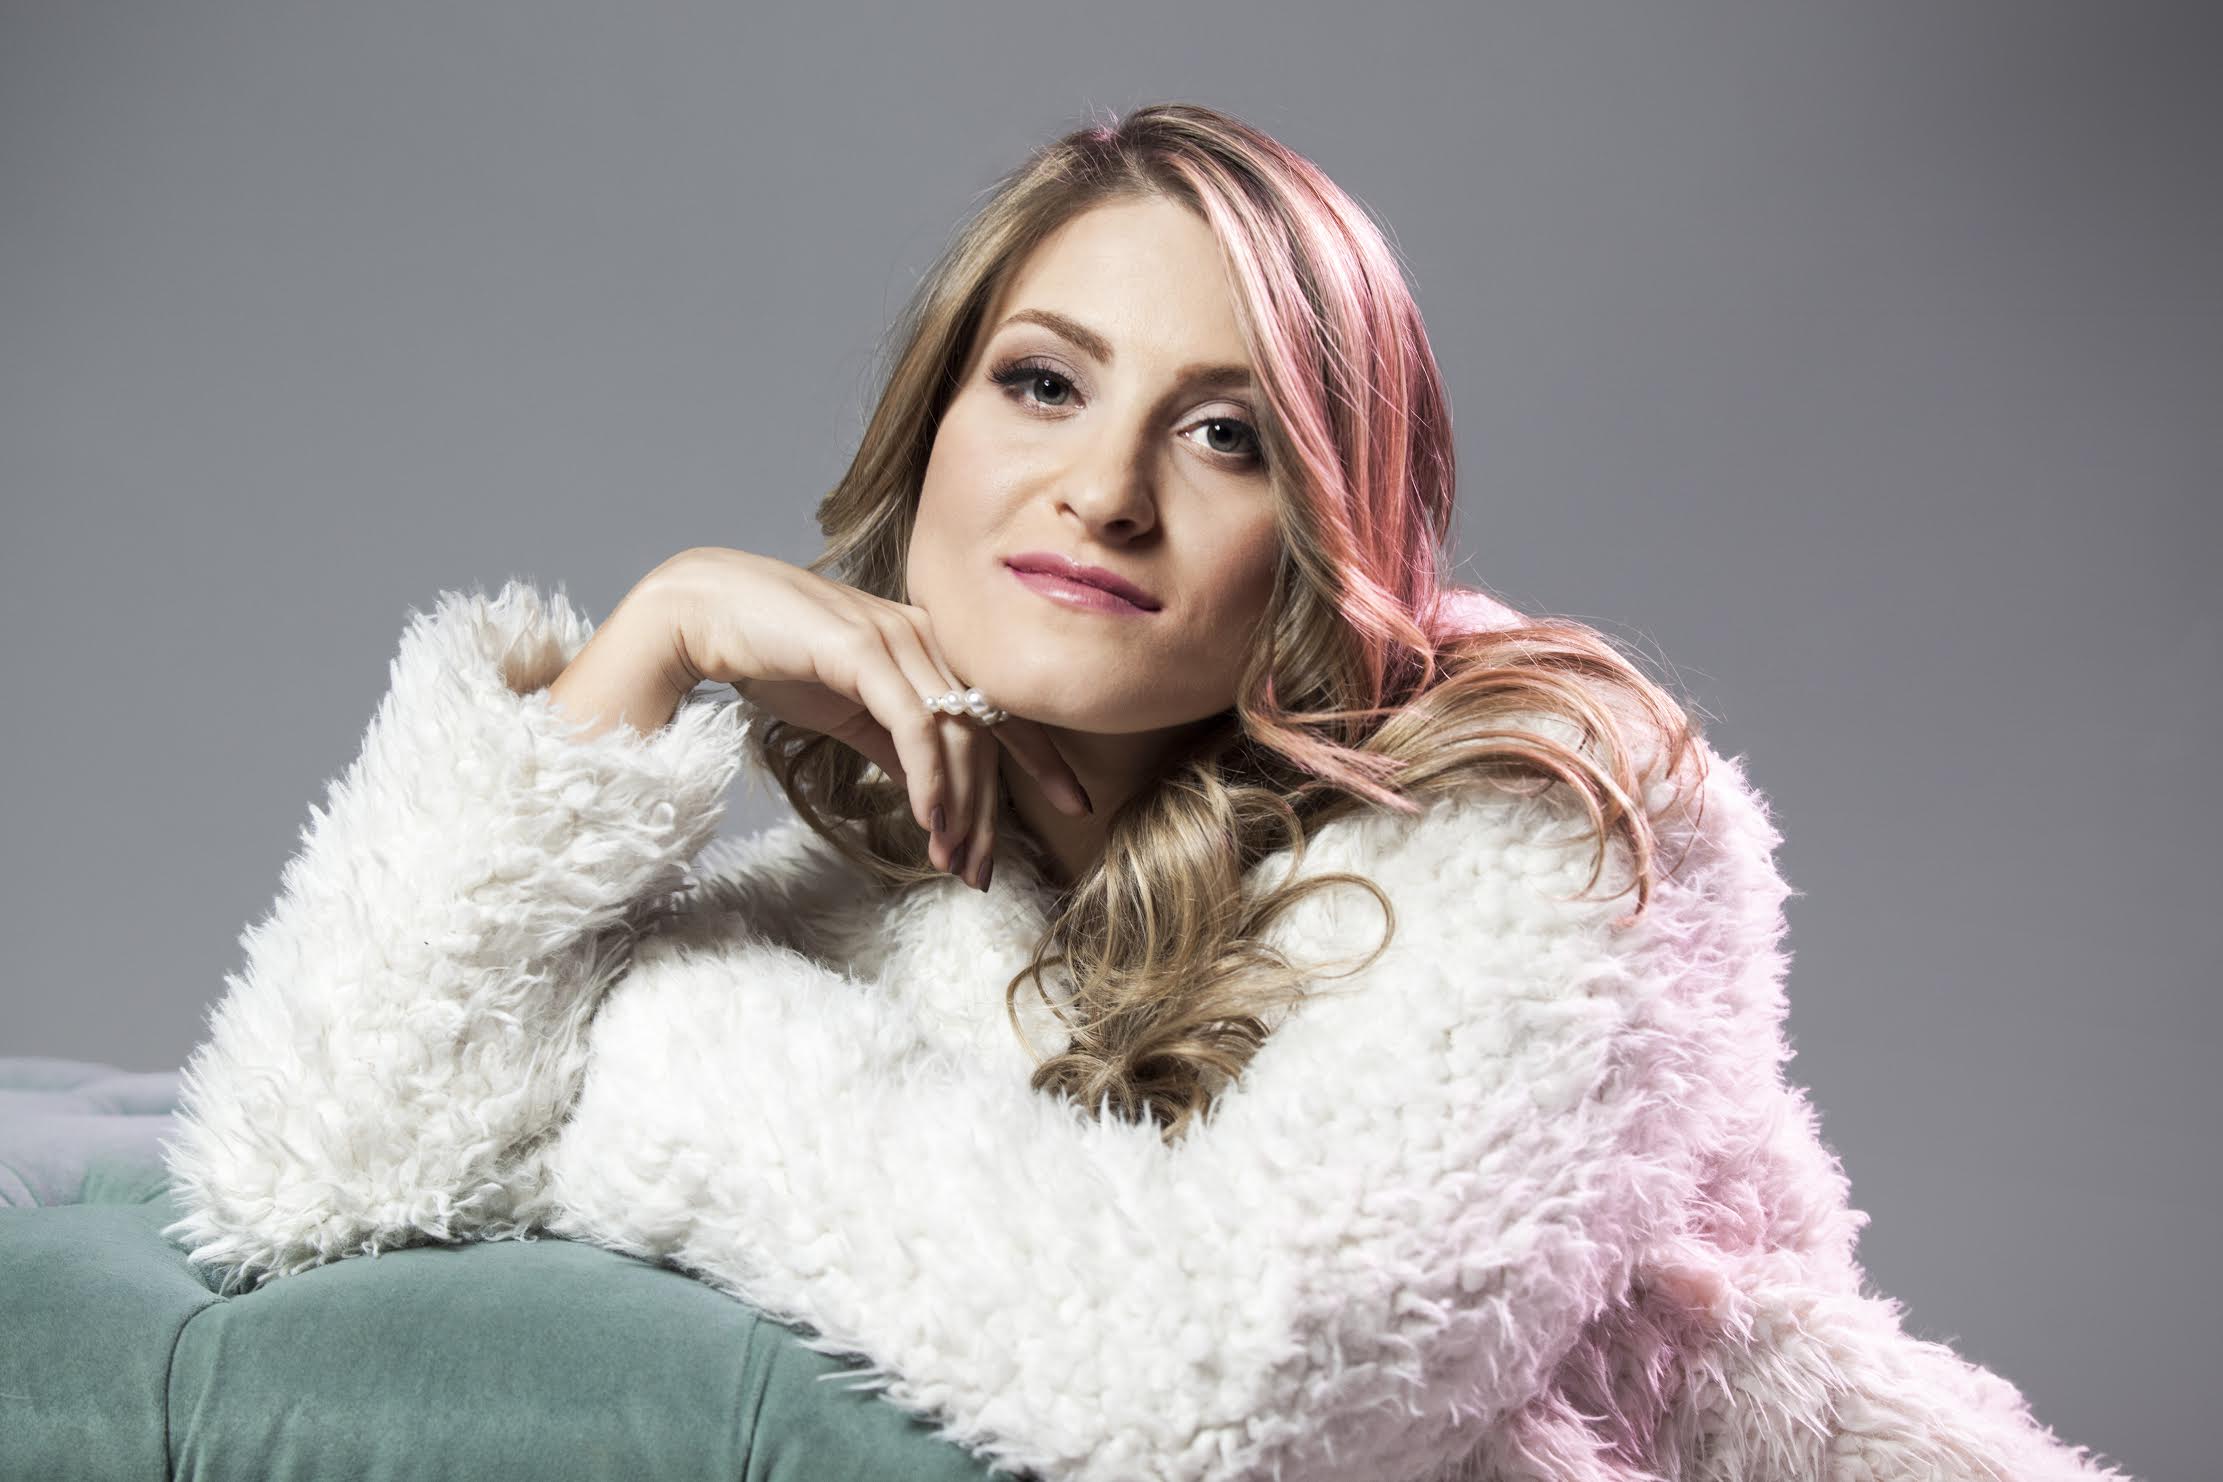 Lena Stone is Making Strides in Country Music with New Song “Can’t Think Straight”